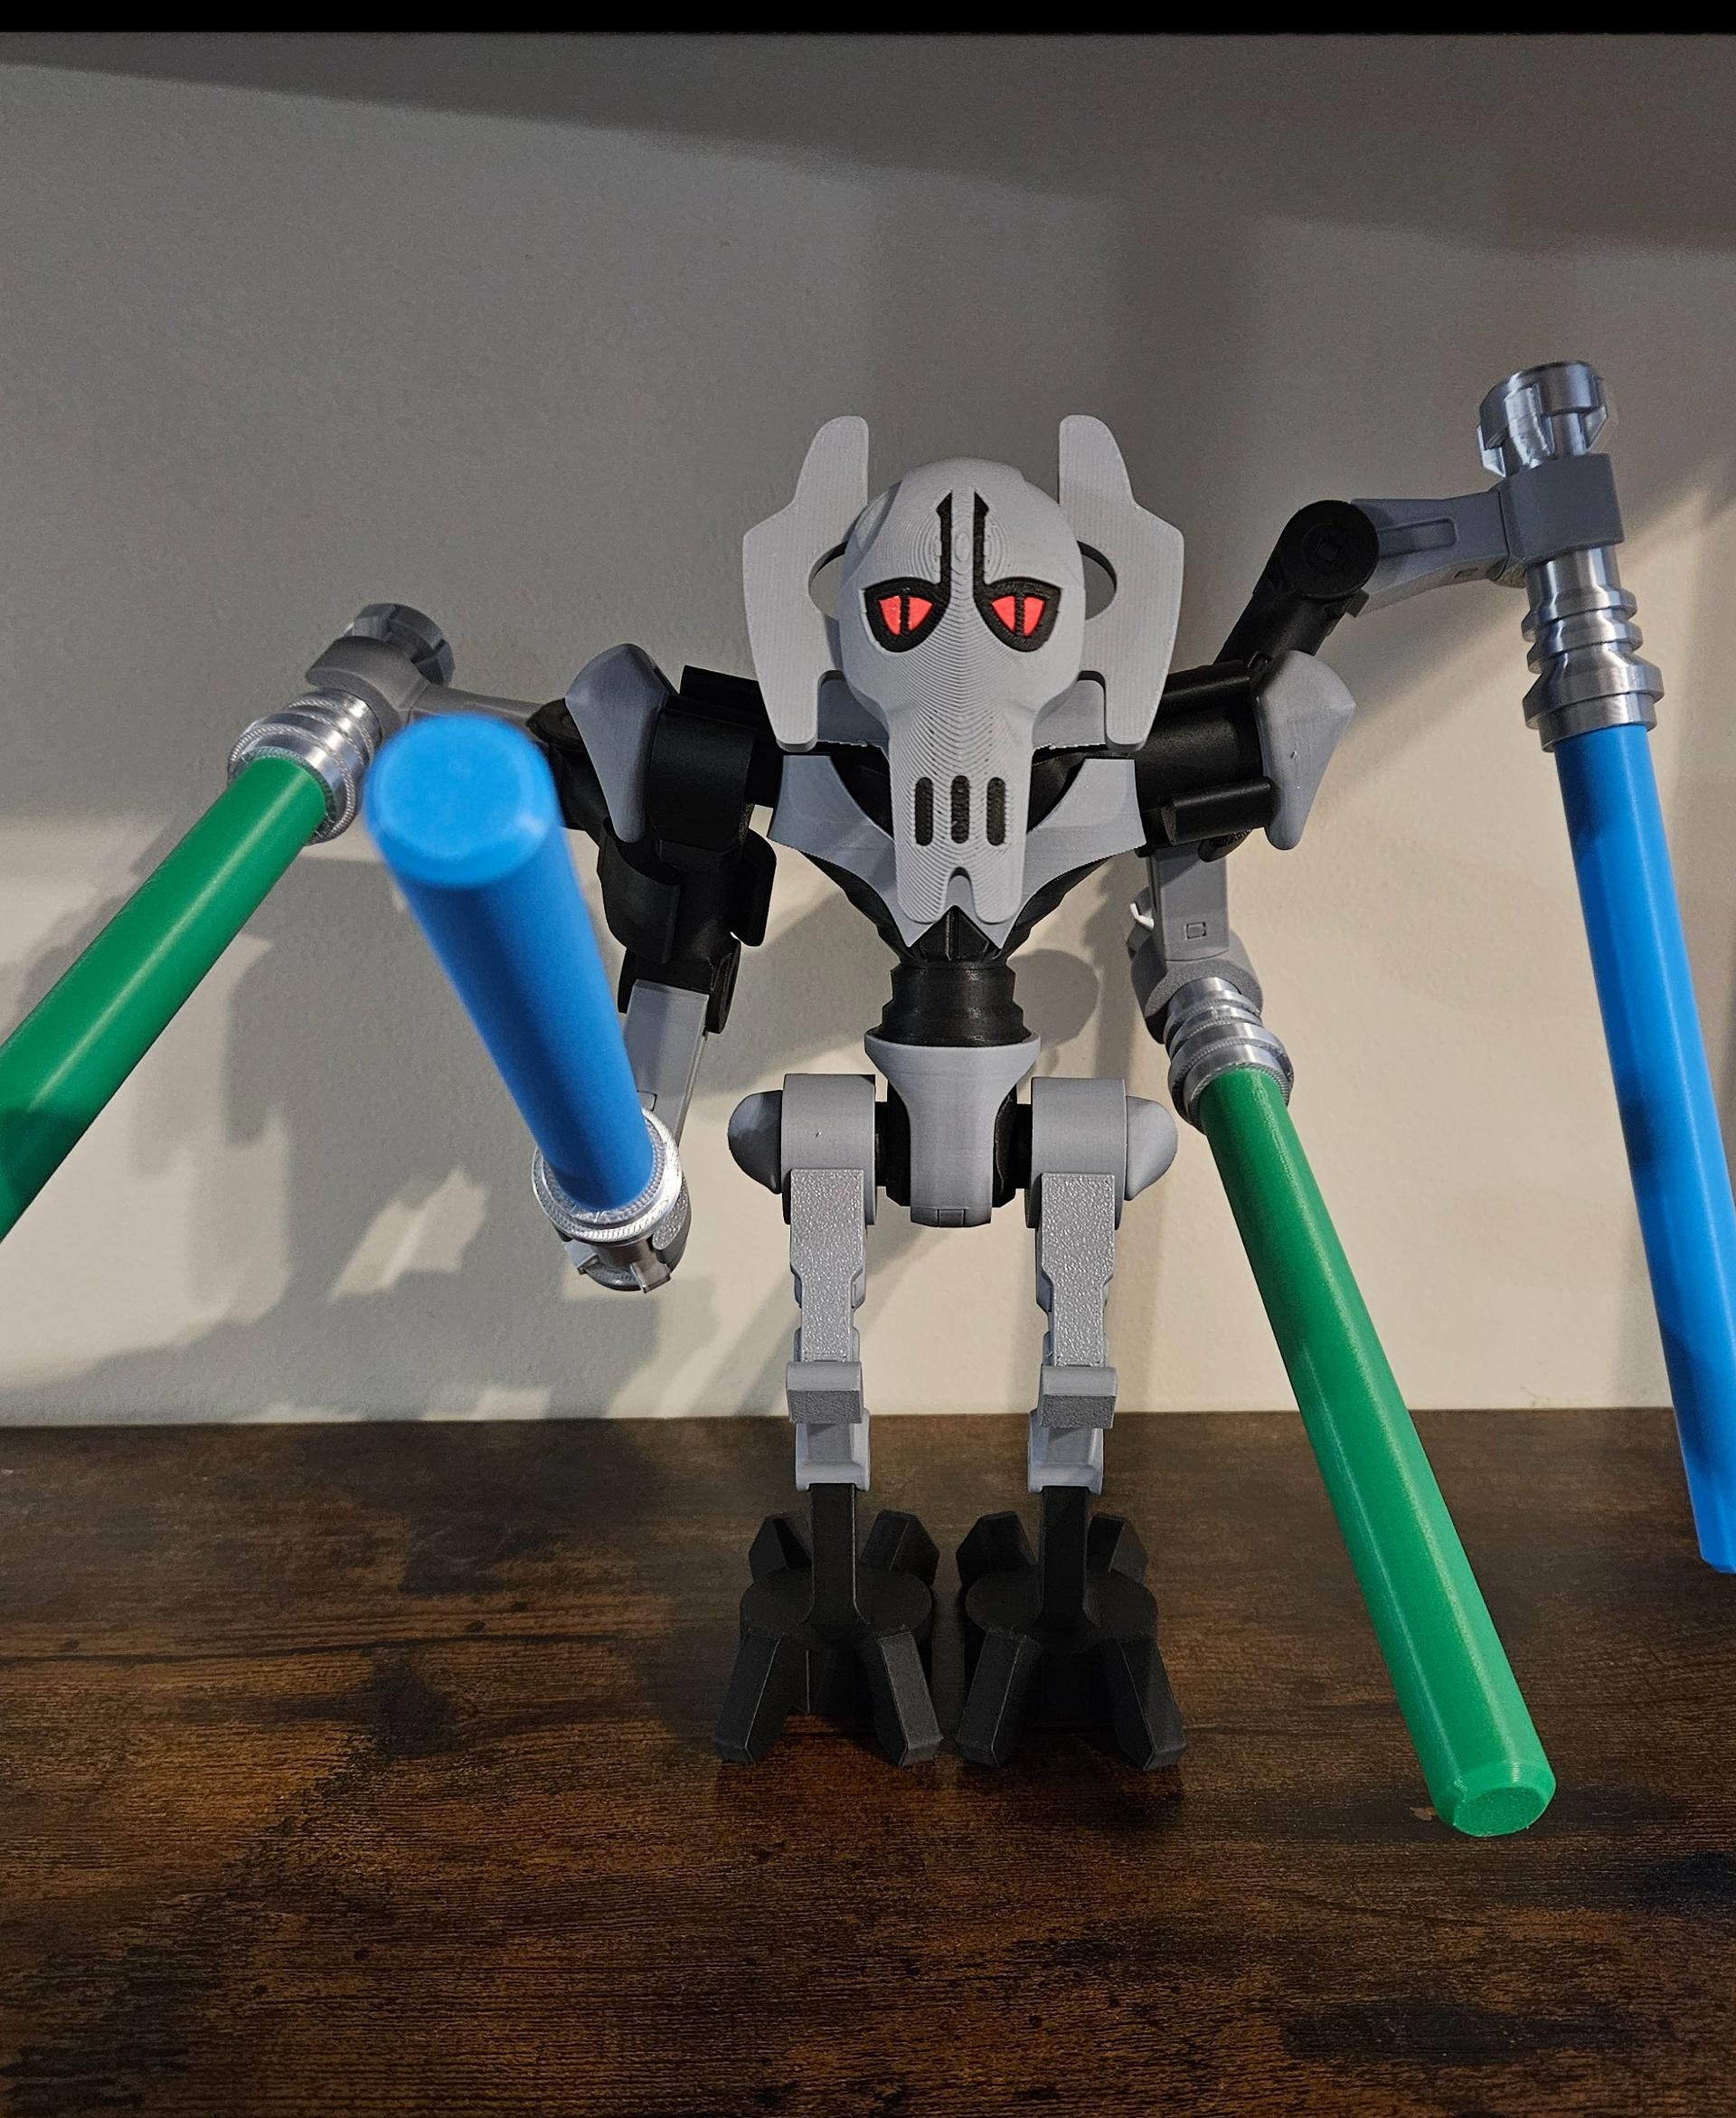 General Grievous (6:1 LEGO-inspired brick figure, NO MMU/AMS, NO supports, NO glue) 3d model